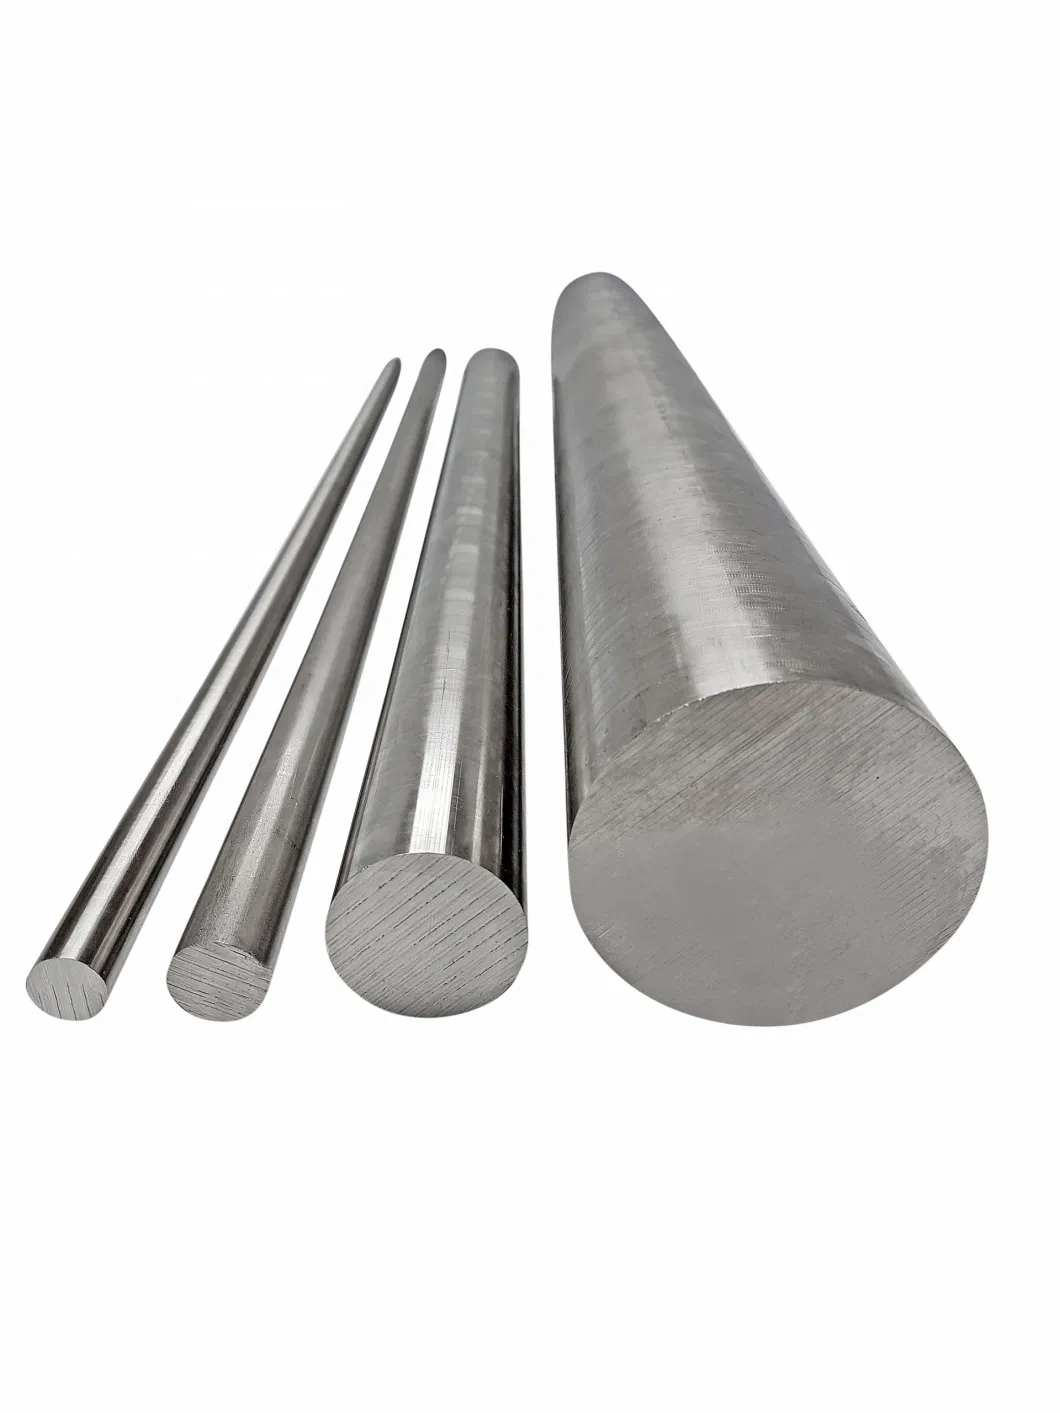 201 304 310 316 321 Stainless Steel Round Bar 2mm 3mm 6mm 8mm 10mm Metal Rod